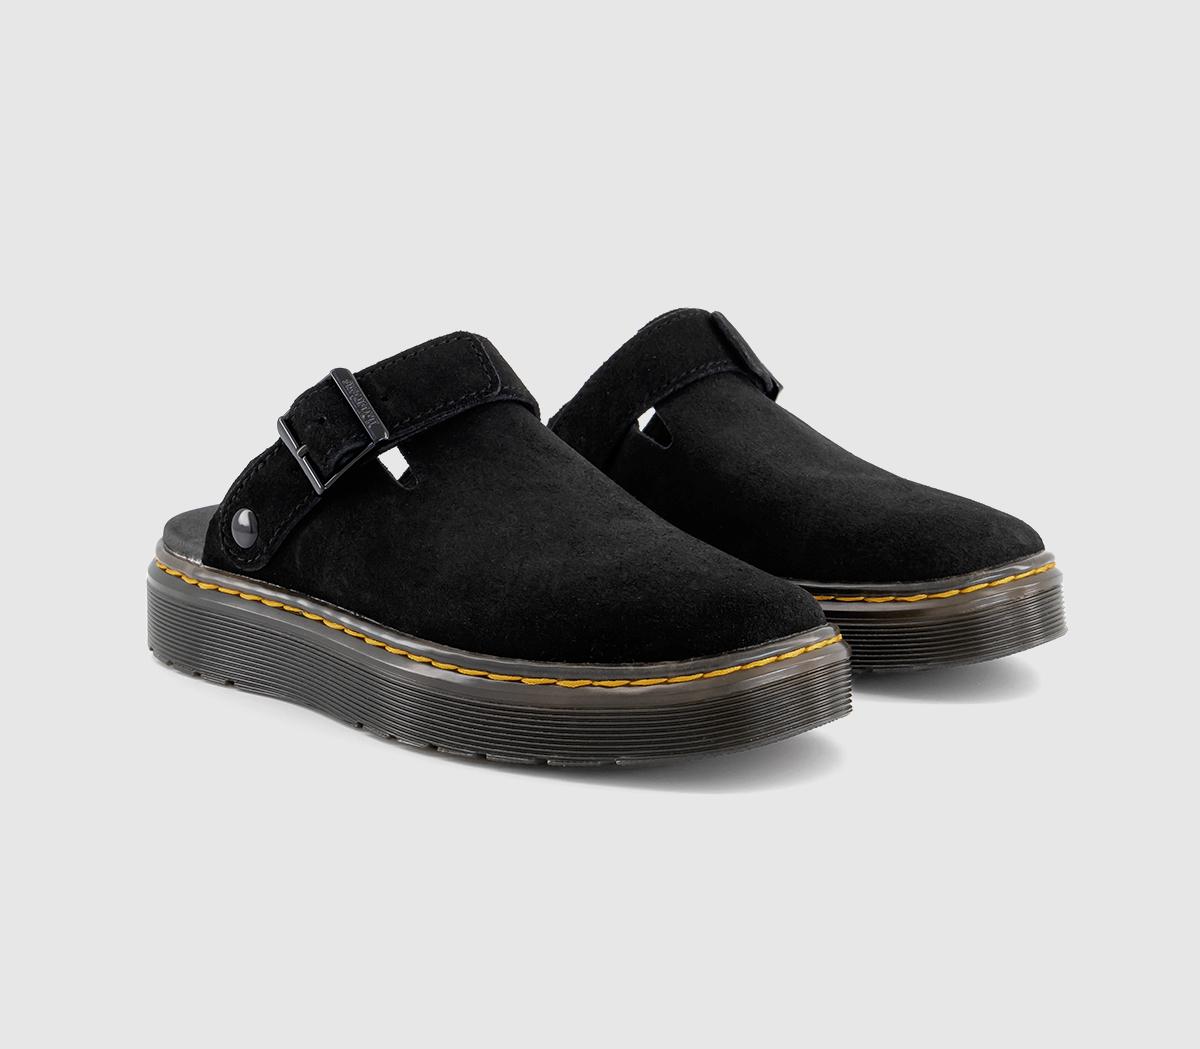 Dr. Martens Womens Carlson Mules Black Suede, 5